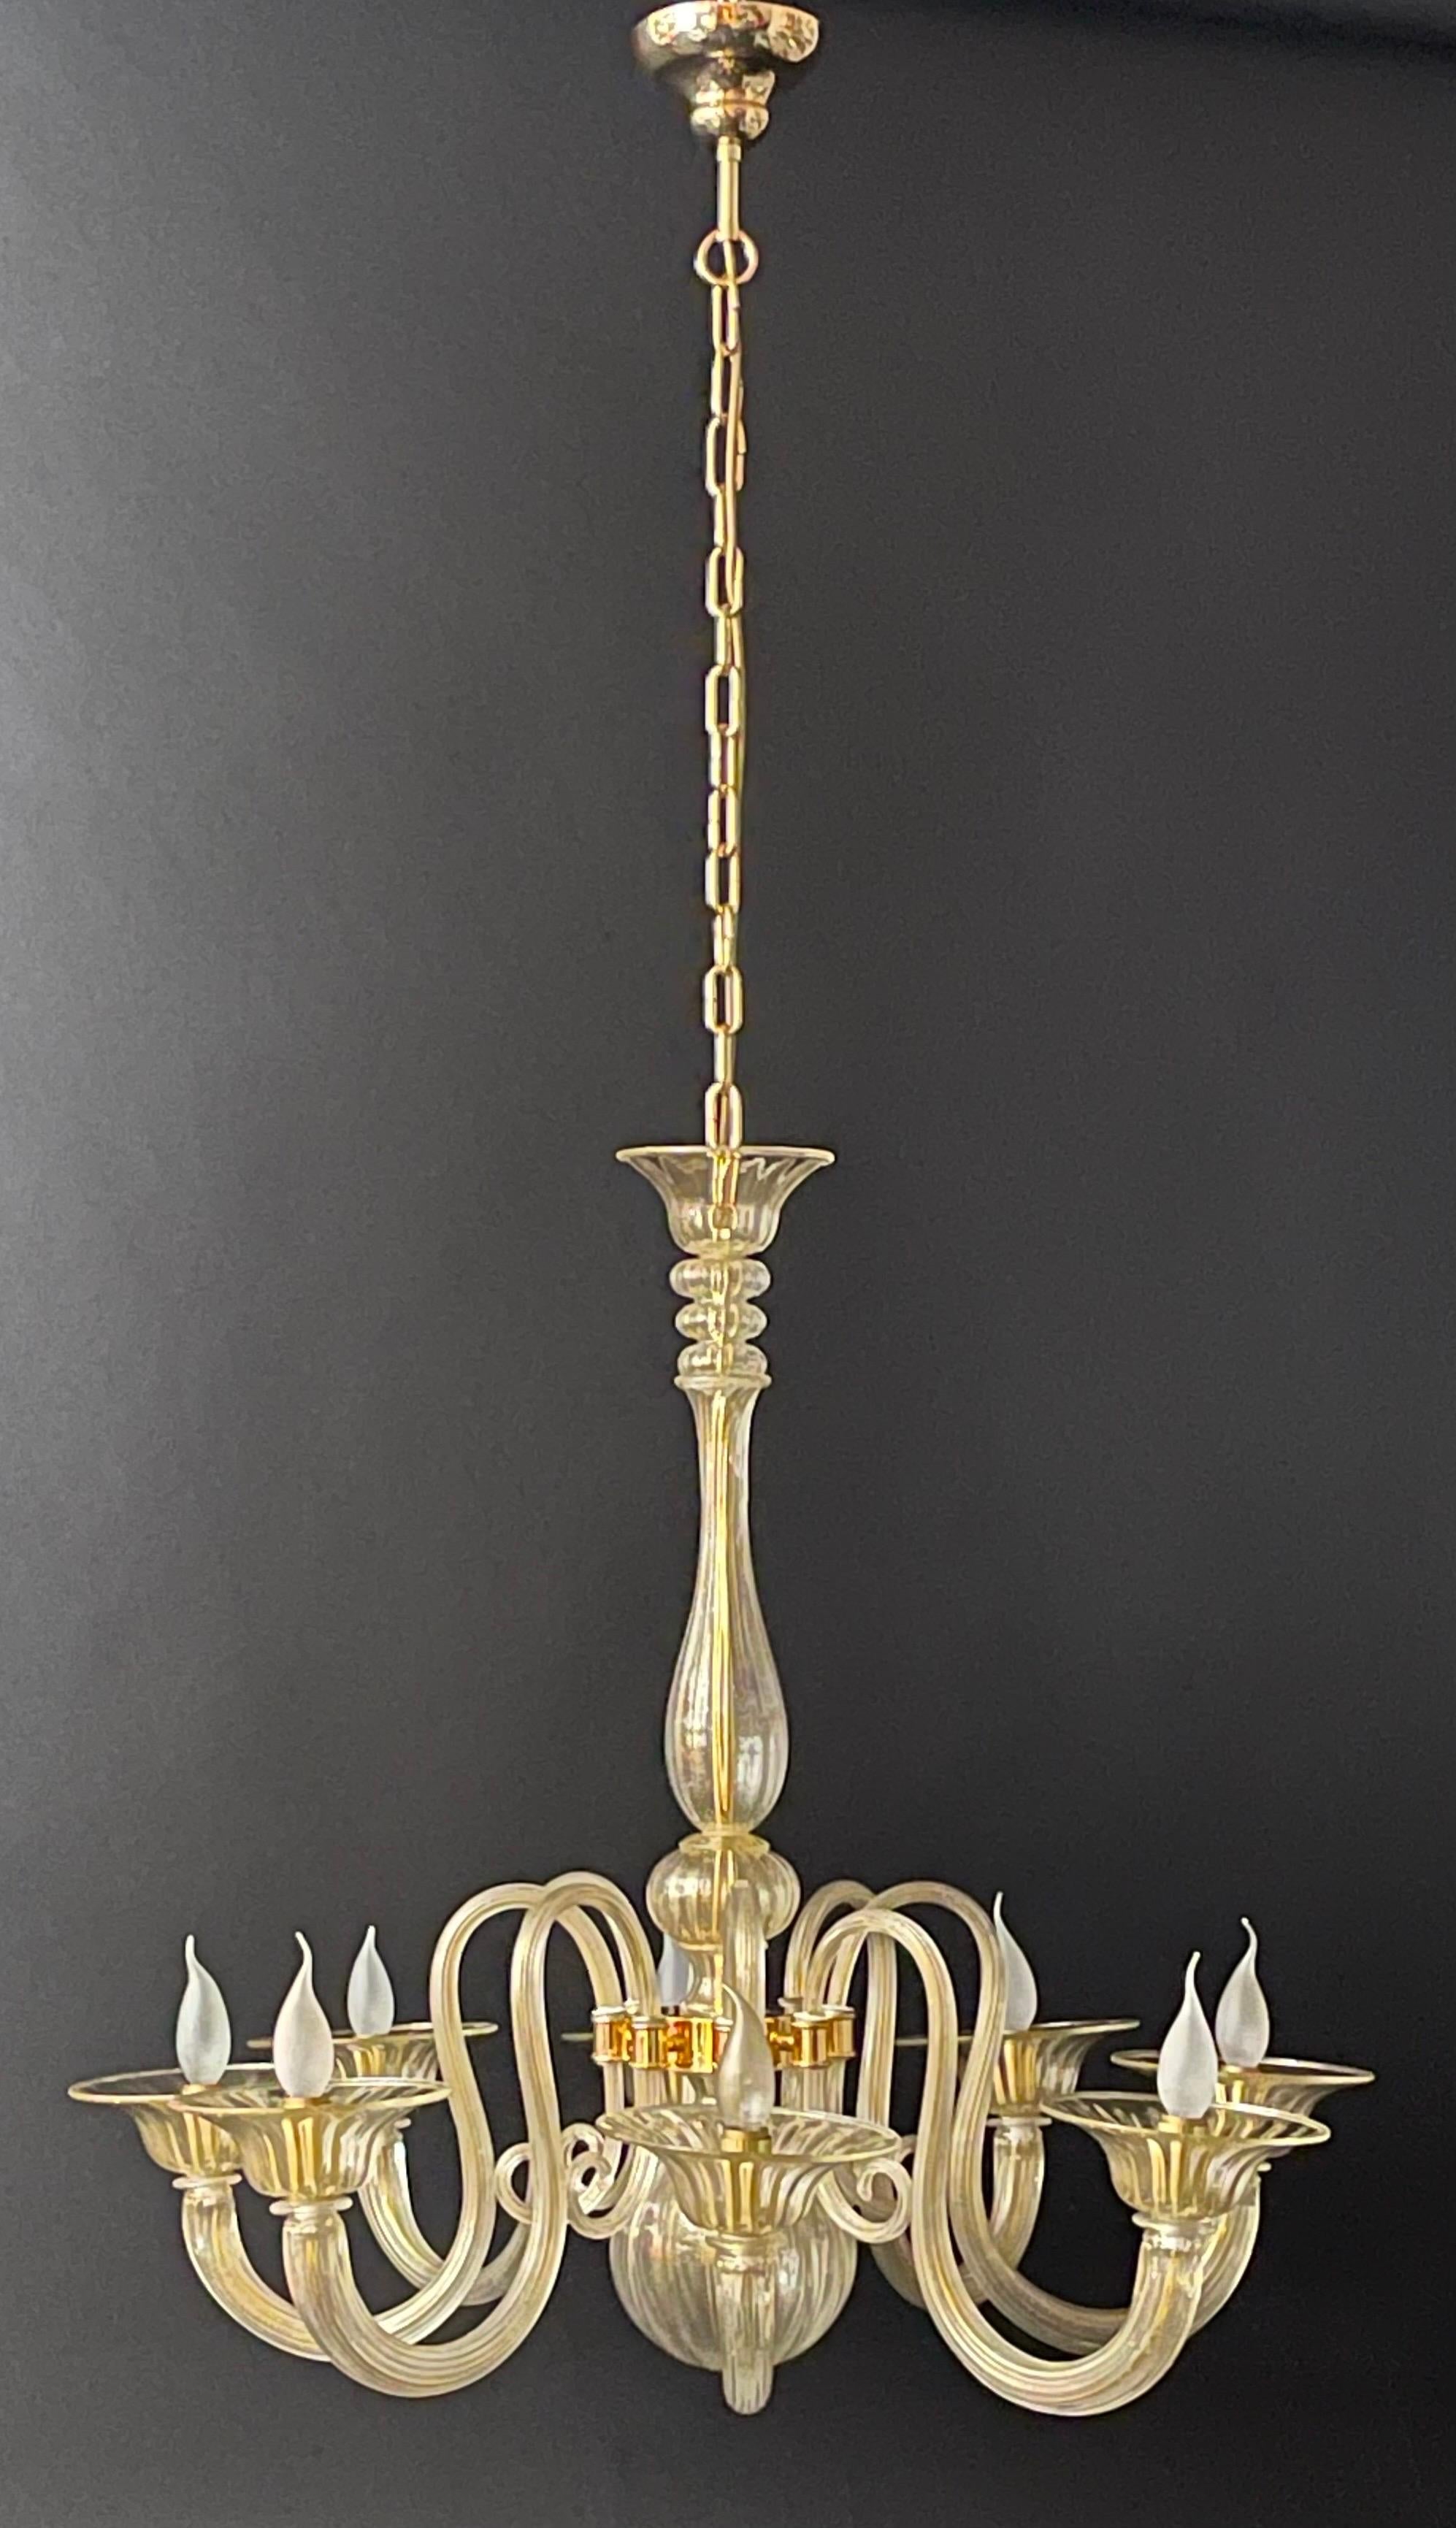 Gilt Large Barovier Toso Gold Dusted Murano Glass Chandelier, circa 1960s For Sale